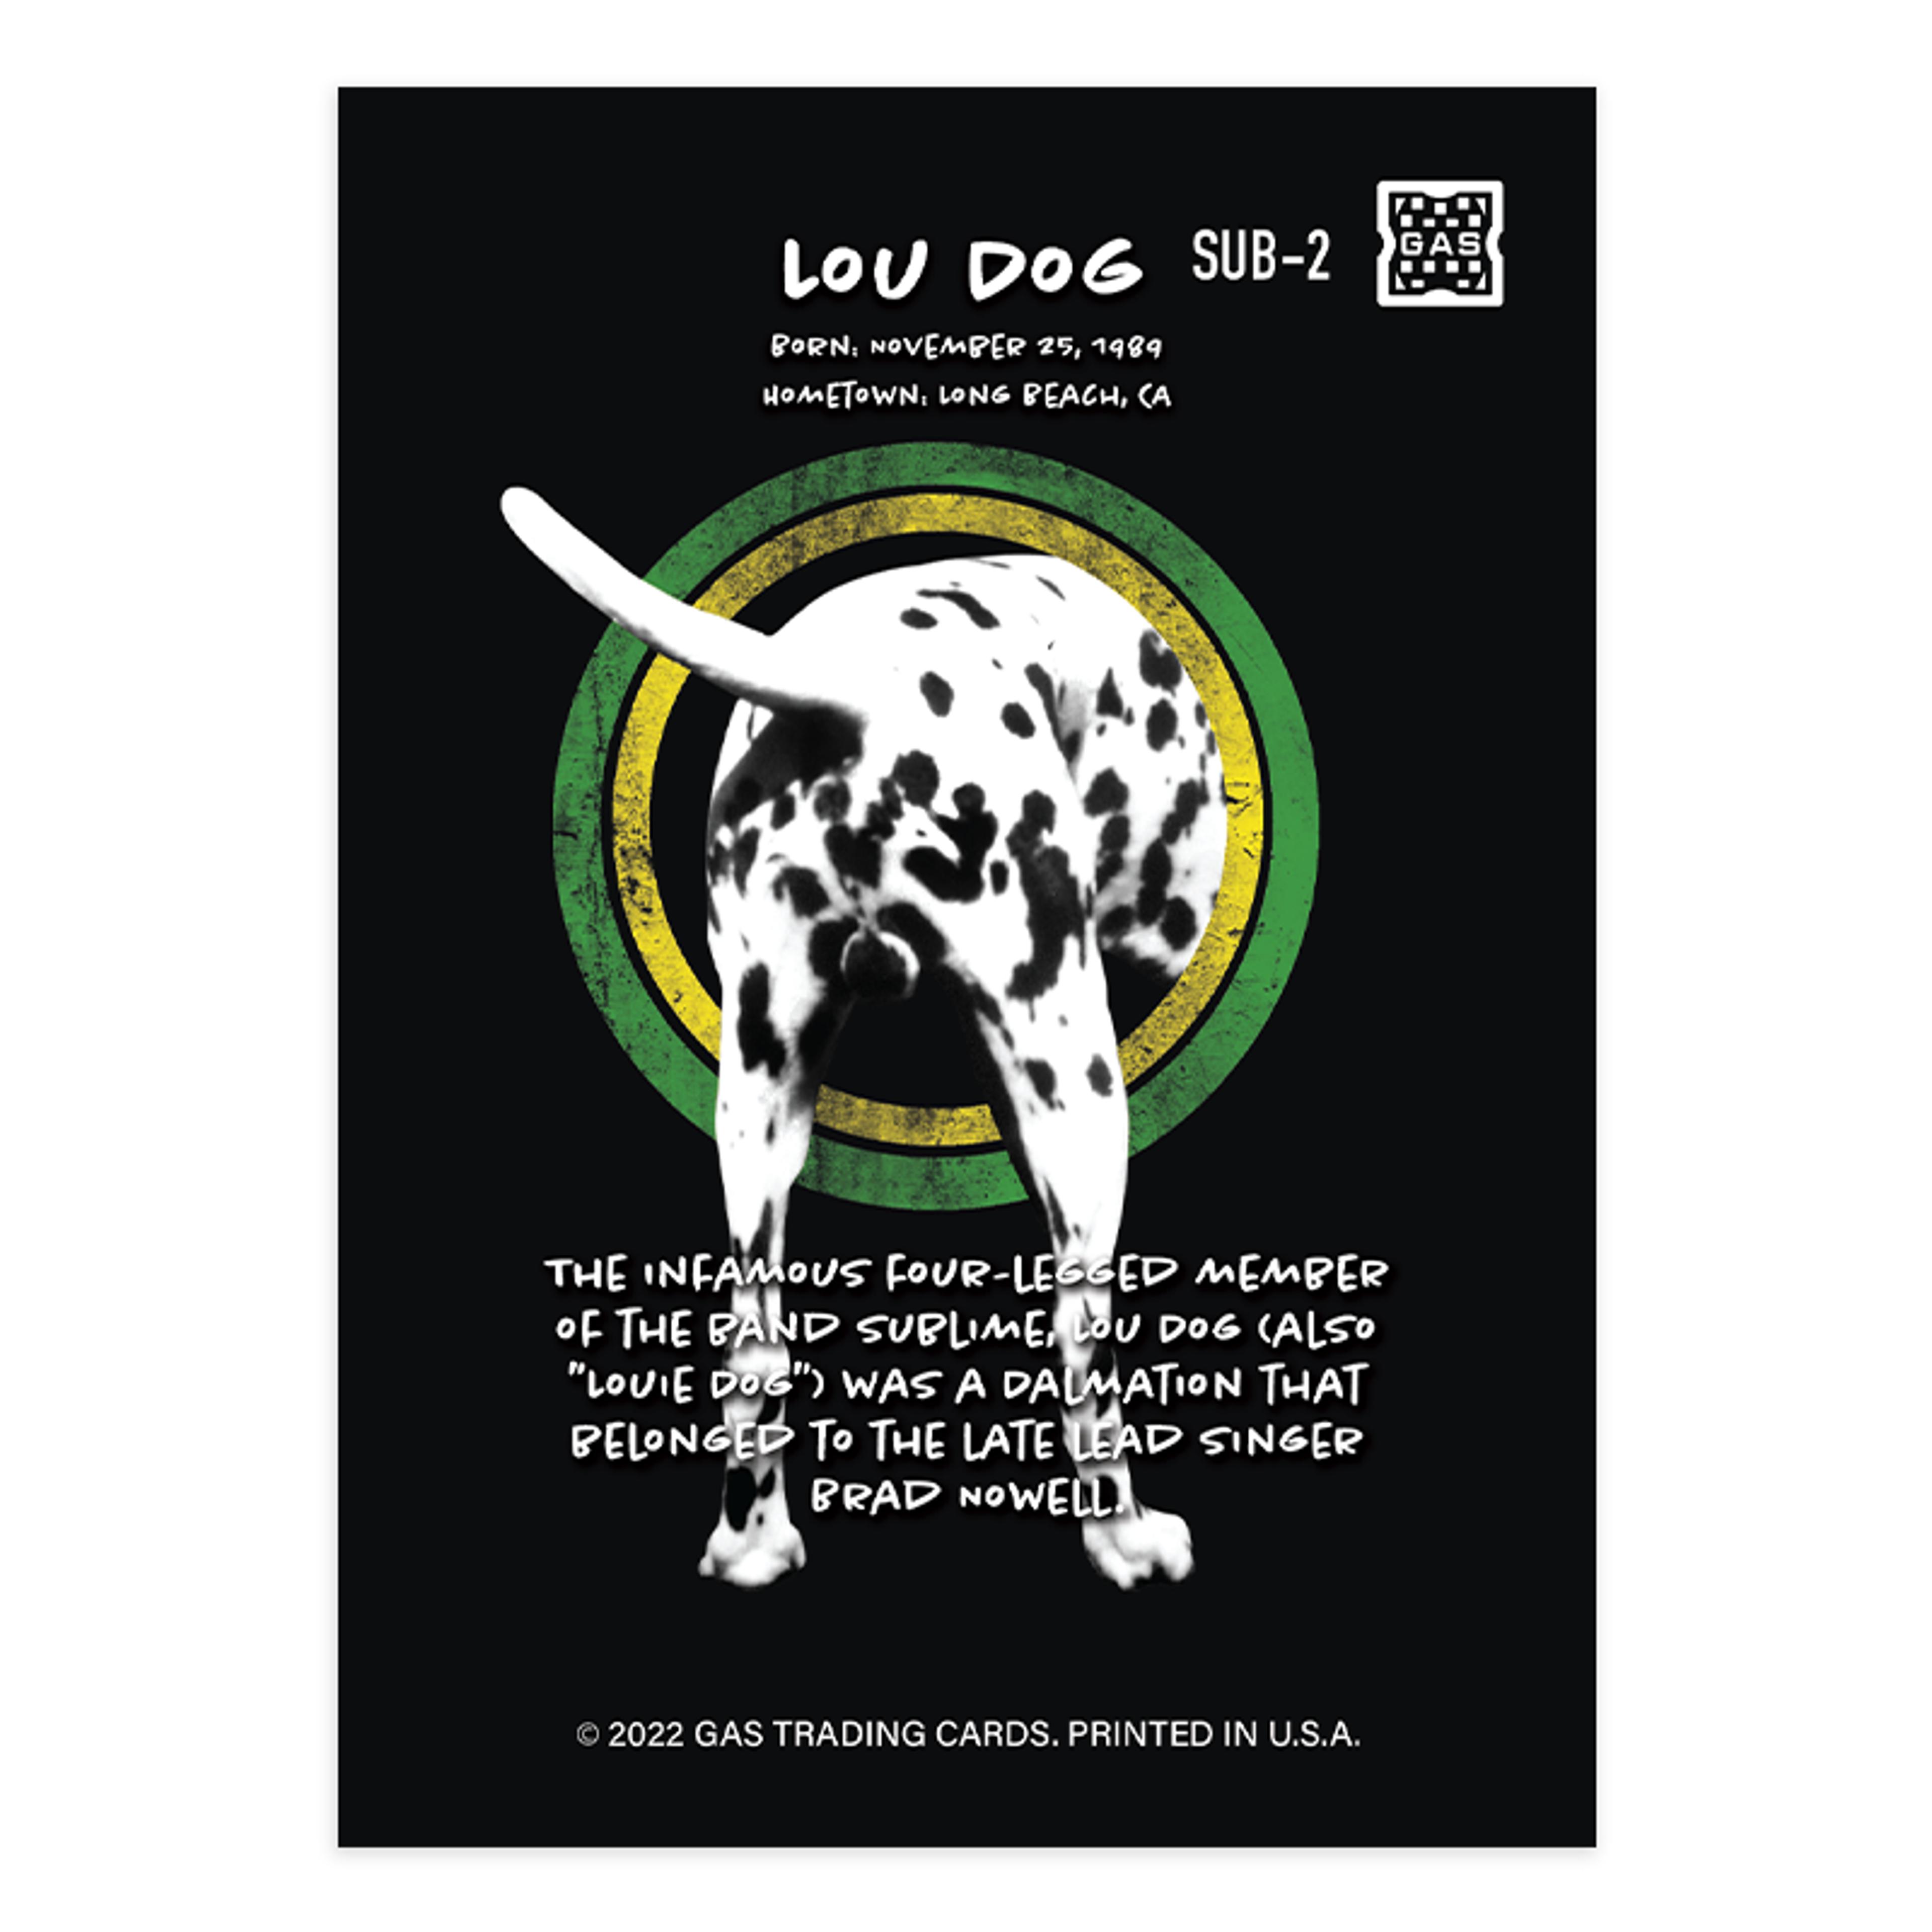 Alternate View 1 of The Official Sublime GAS Trading Card #2 Lou Dog